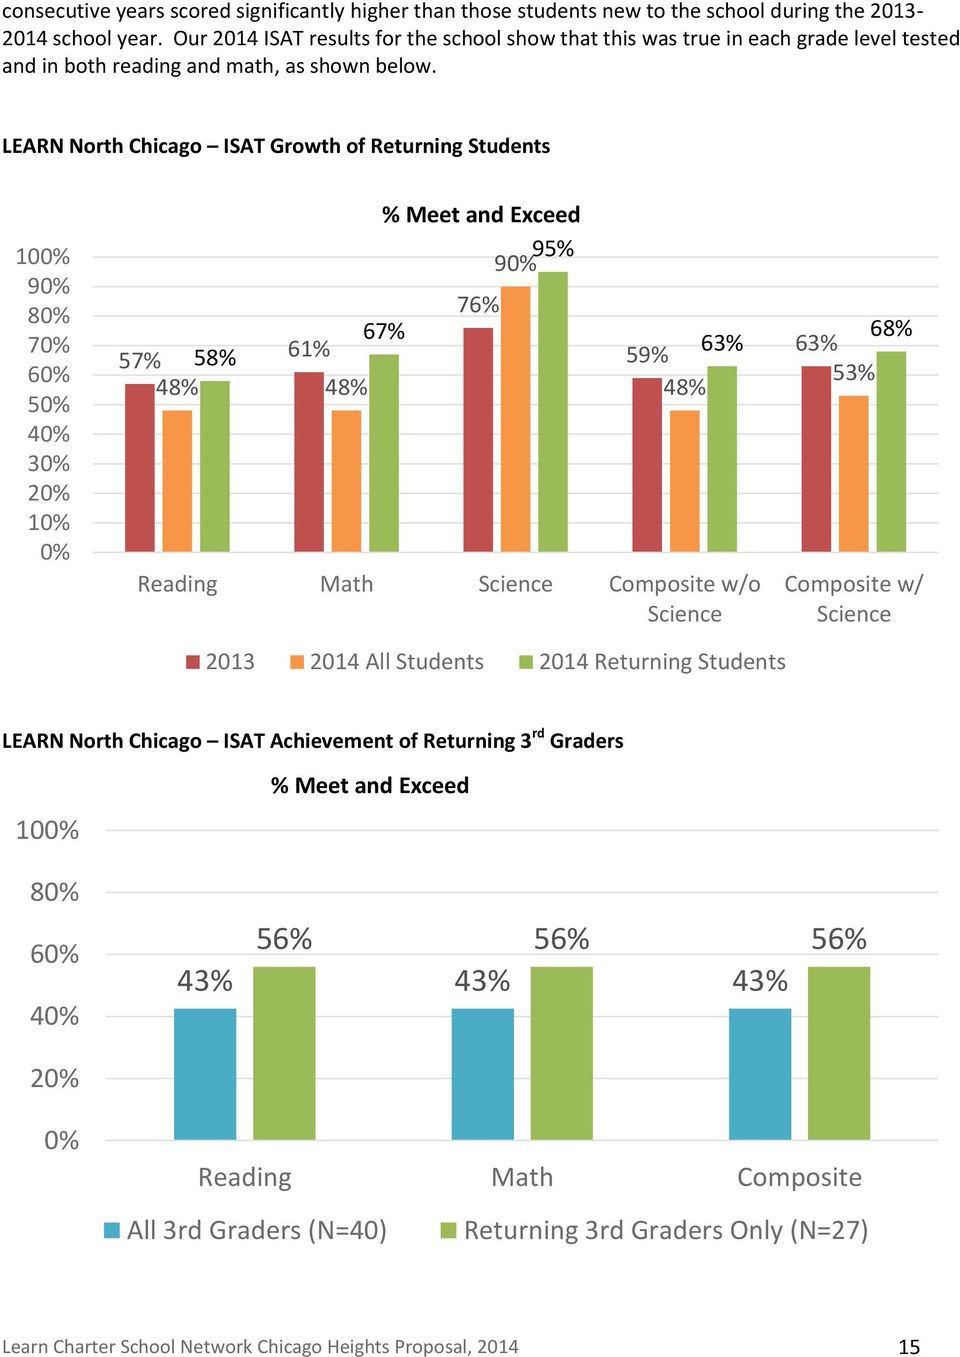 LEARN North Chicago ISAT Growth of Returning Students 100% 90% 80% 70% 60% 50% 40% 30% 20% 10% 0% 67% 57% 58% 61% 48% 48% % Meet and Exceed 95% 90% 76% 59% 63% 48% Reading Math Science